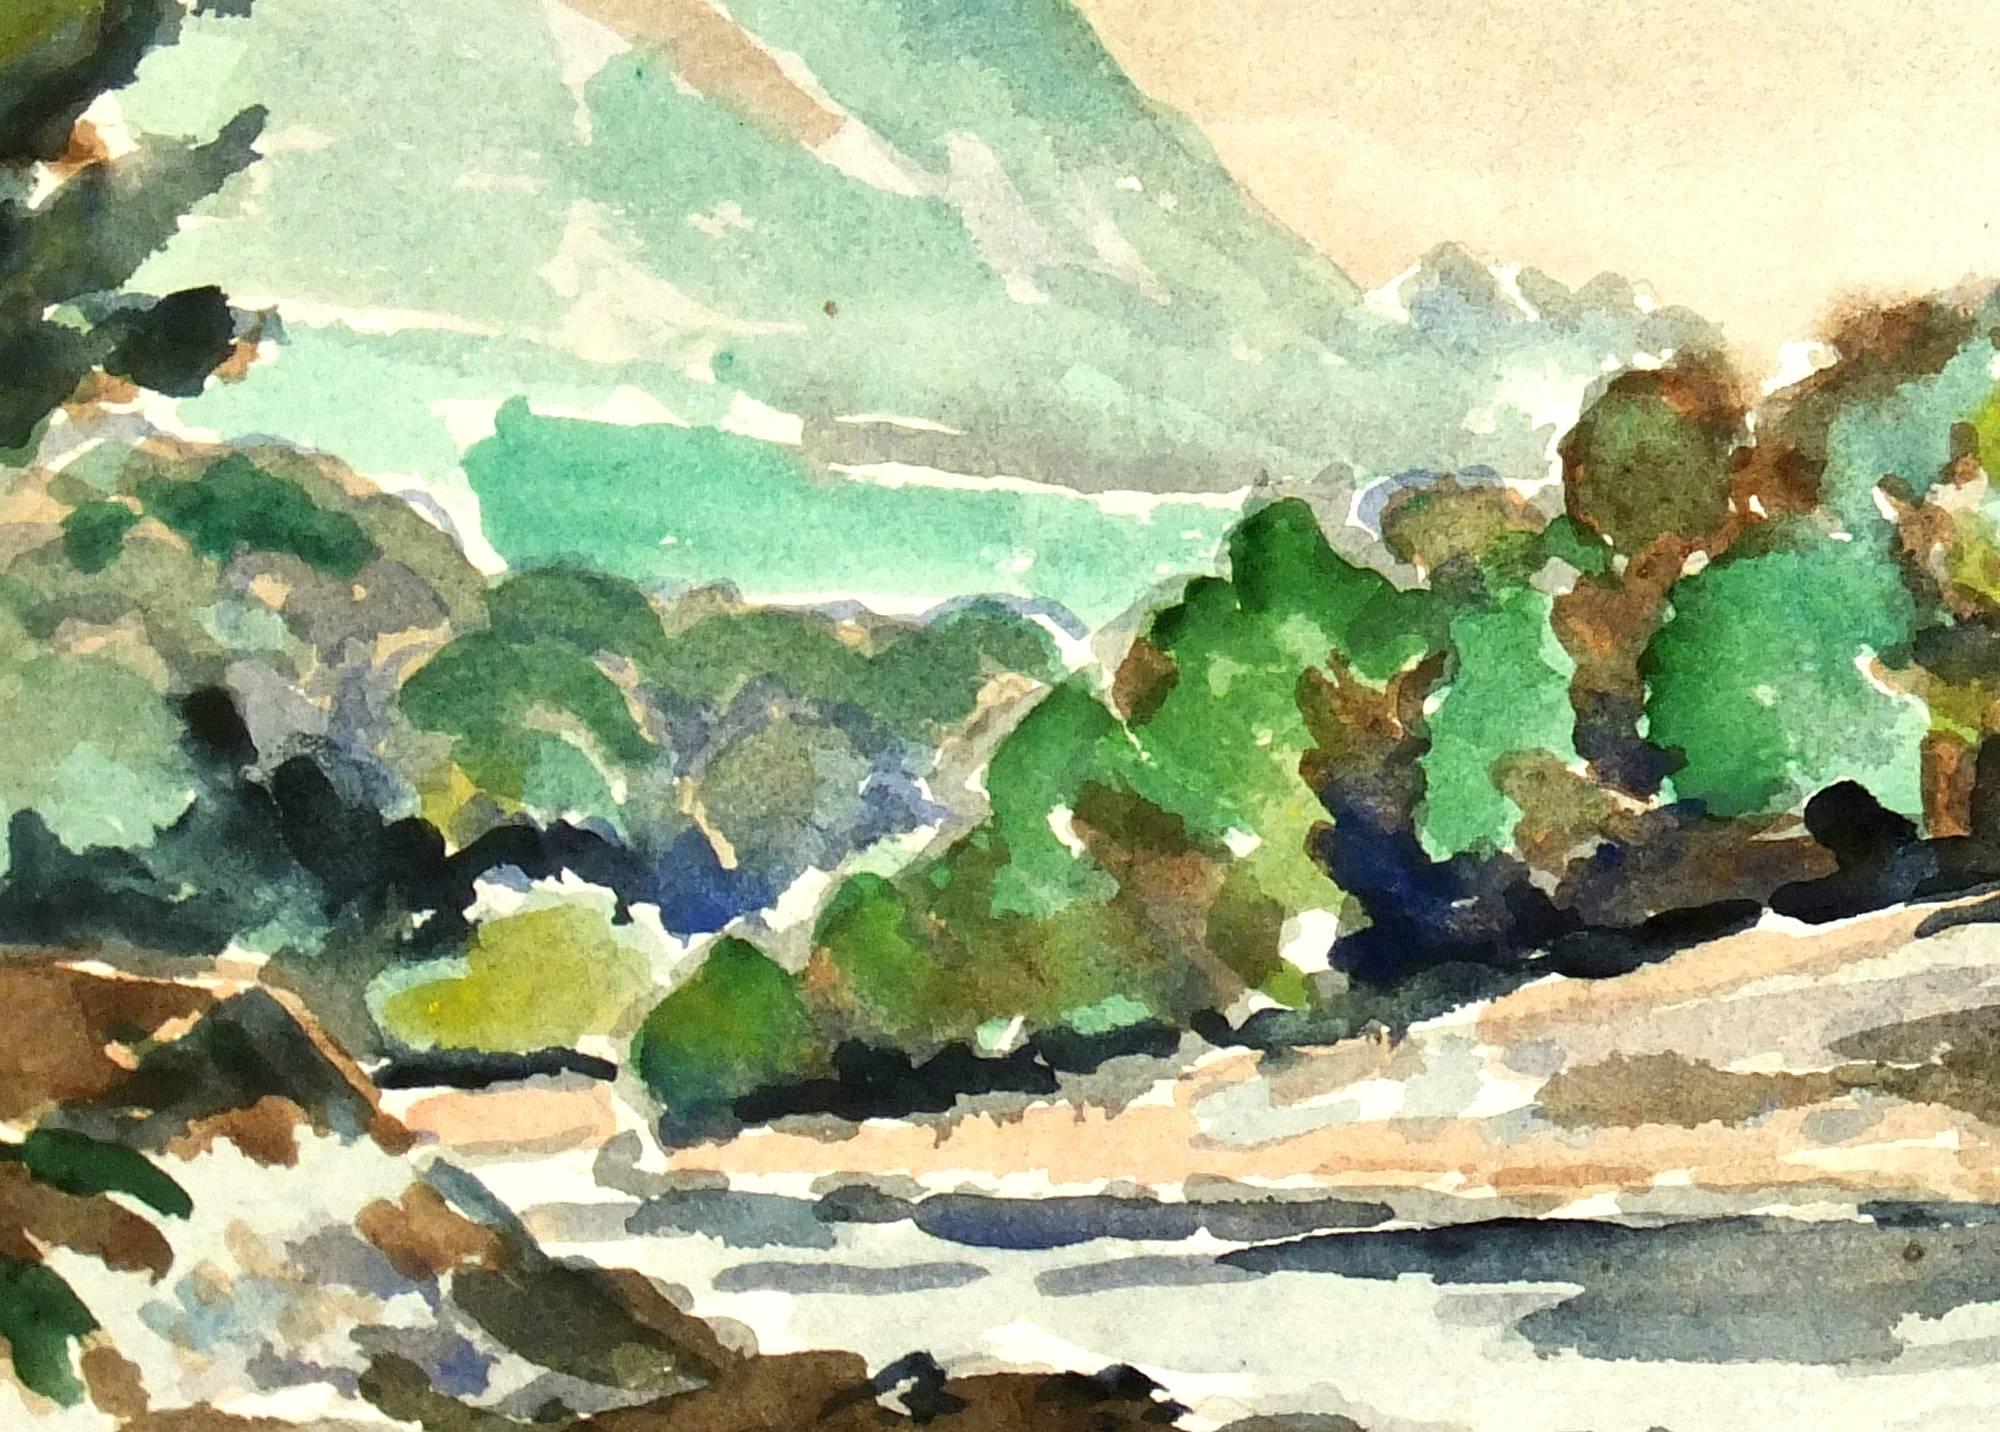 River Valley Watercolor - Art by Unknown